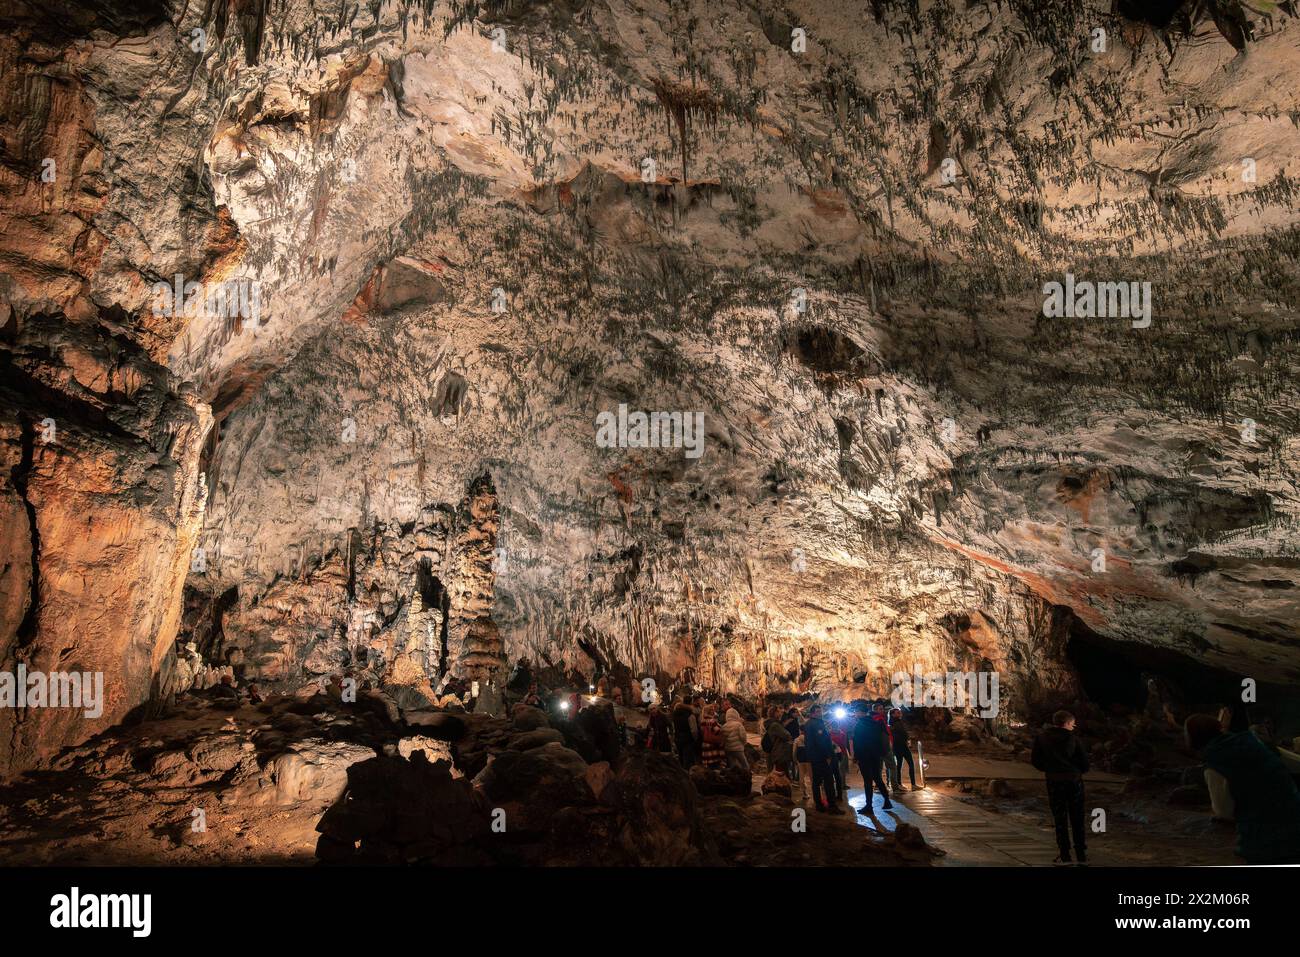 03.30.24. Aggtelek, Hungary. The baradla cave is an  ancient amazing dripstone cave in Aggtelek national park, East Hungary near by Slovakian border. Stock Photo